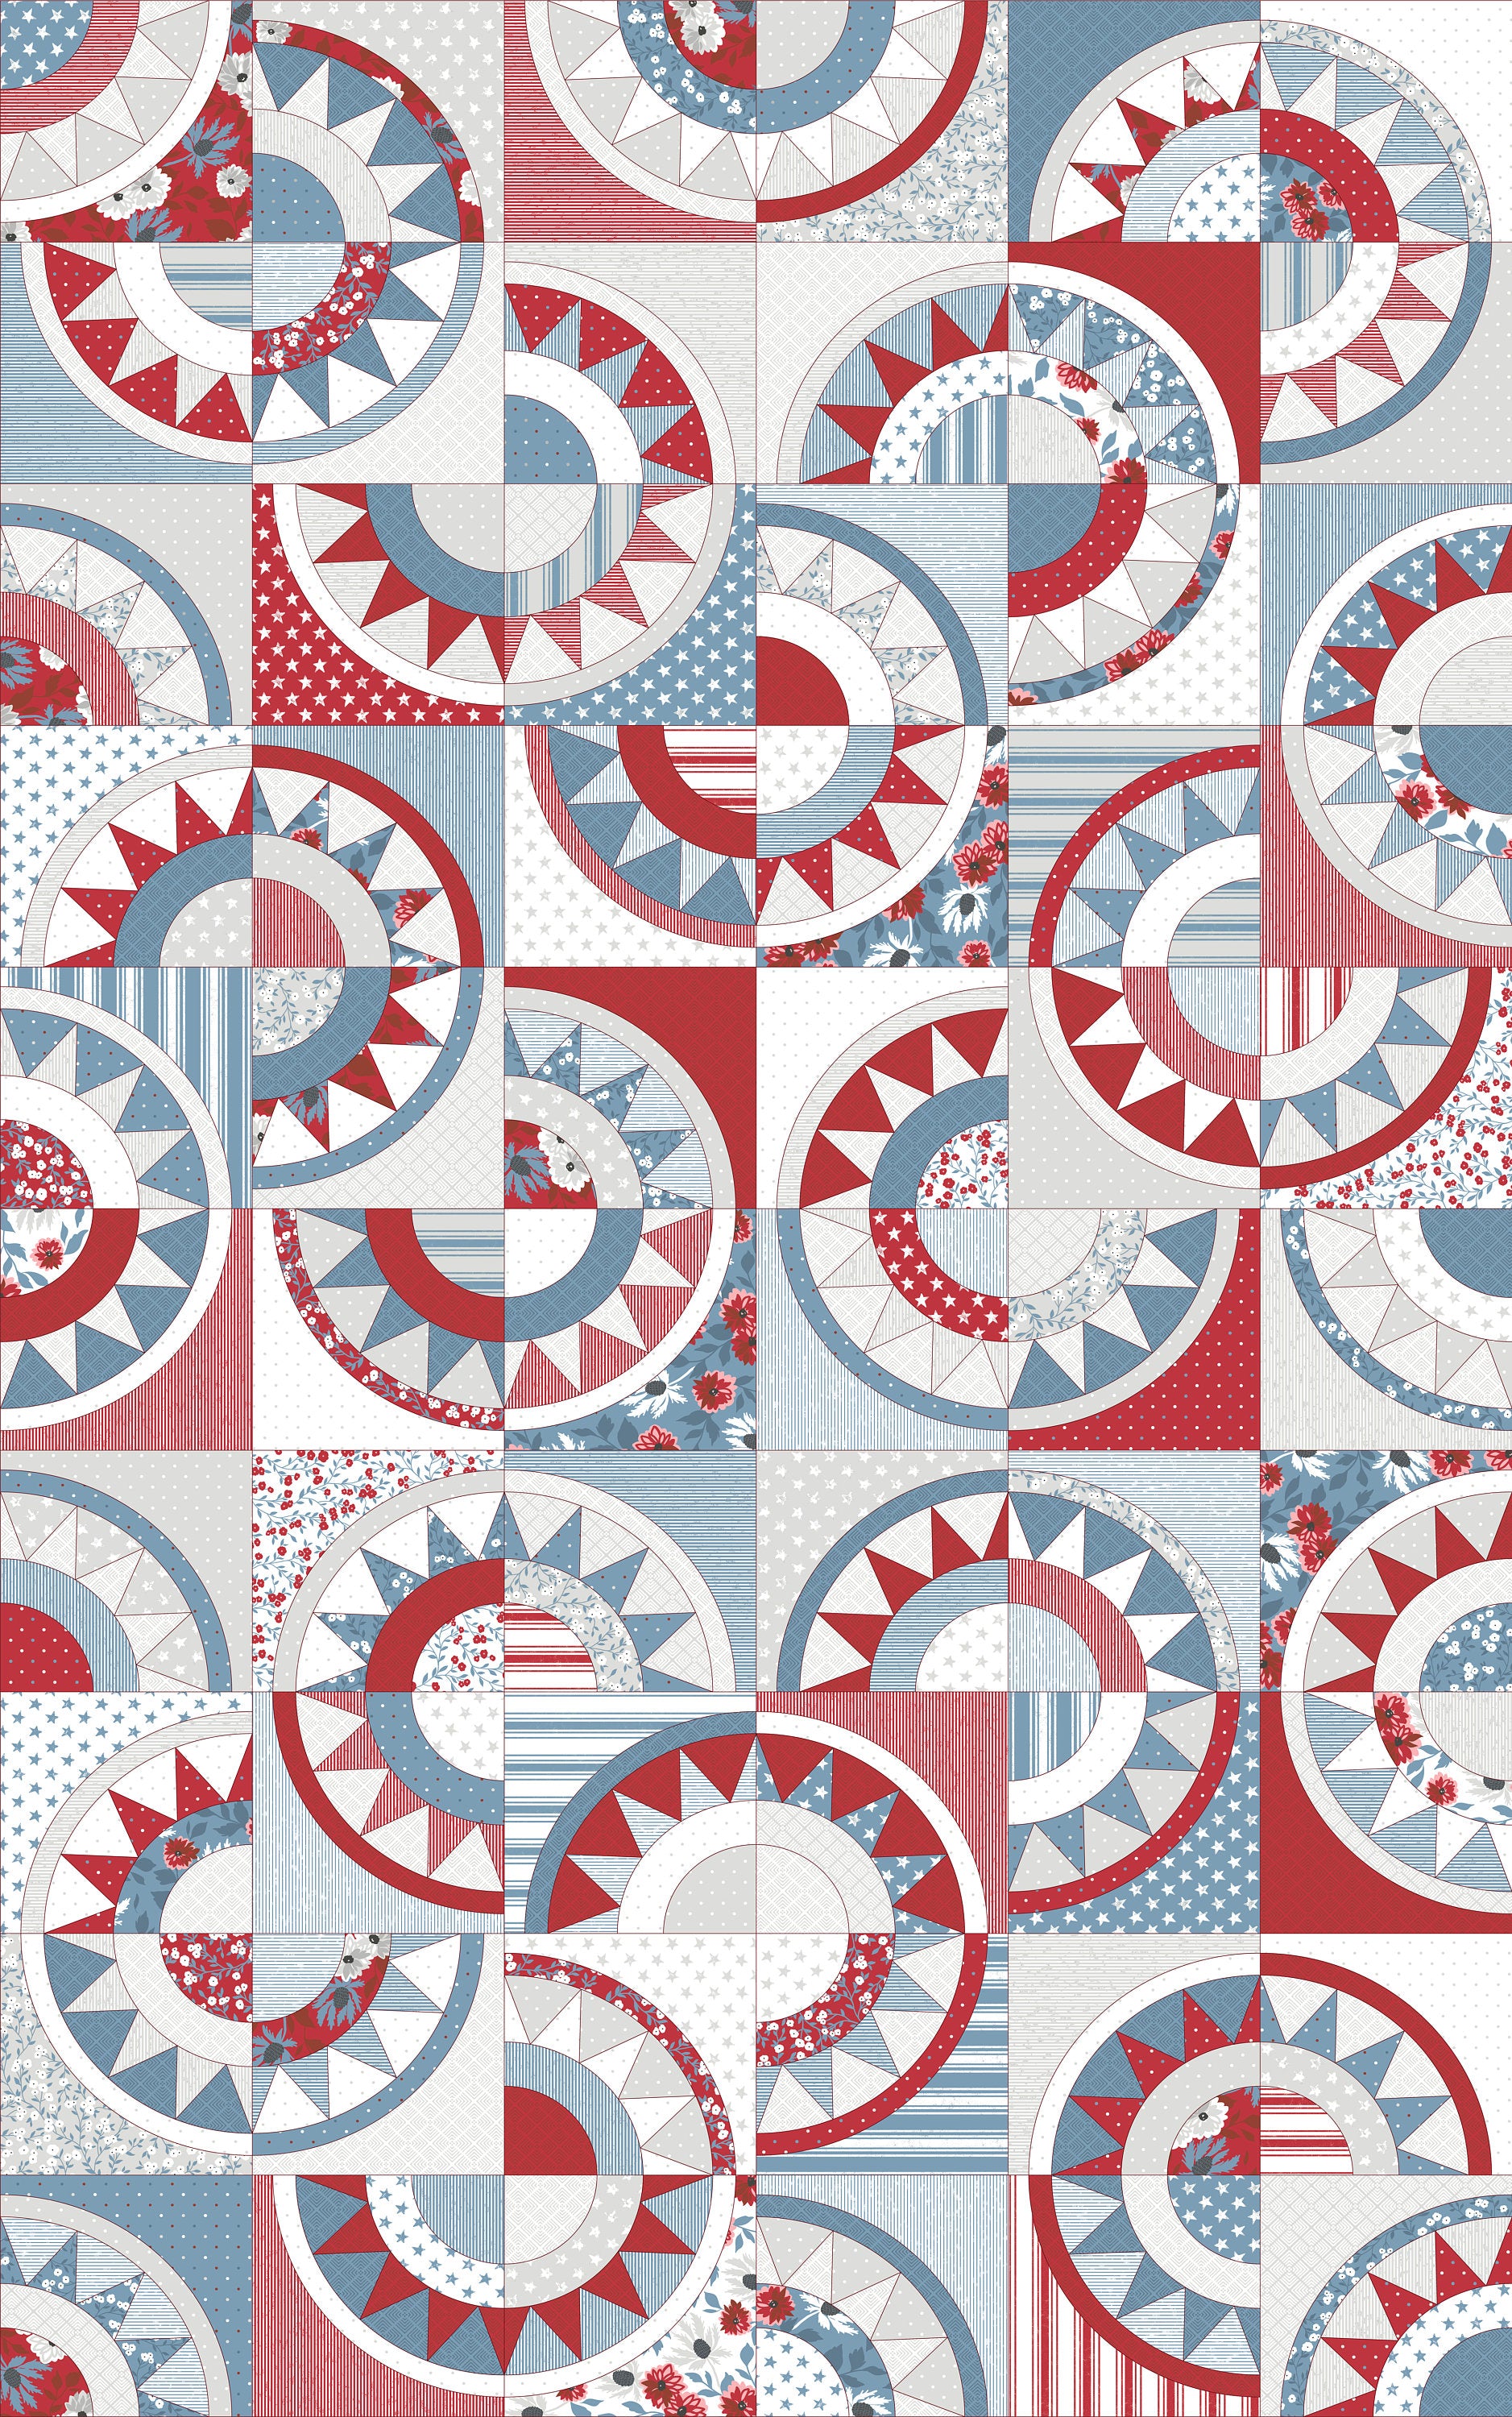 Old Glory by Lella Boutique for Moda Quilter's Cotton Charm Pack of 42 5 x 5 inch squares